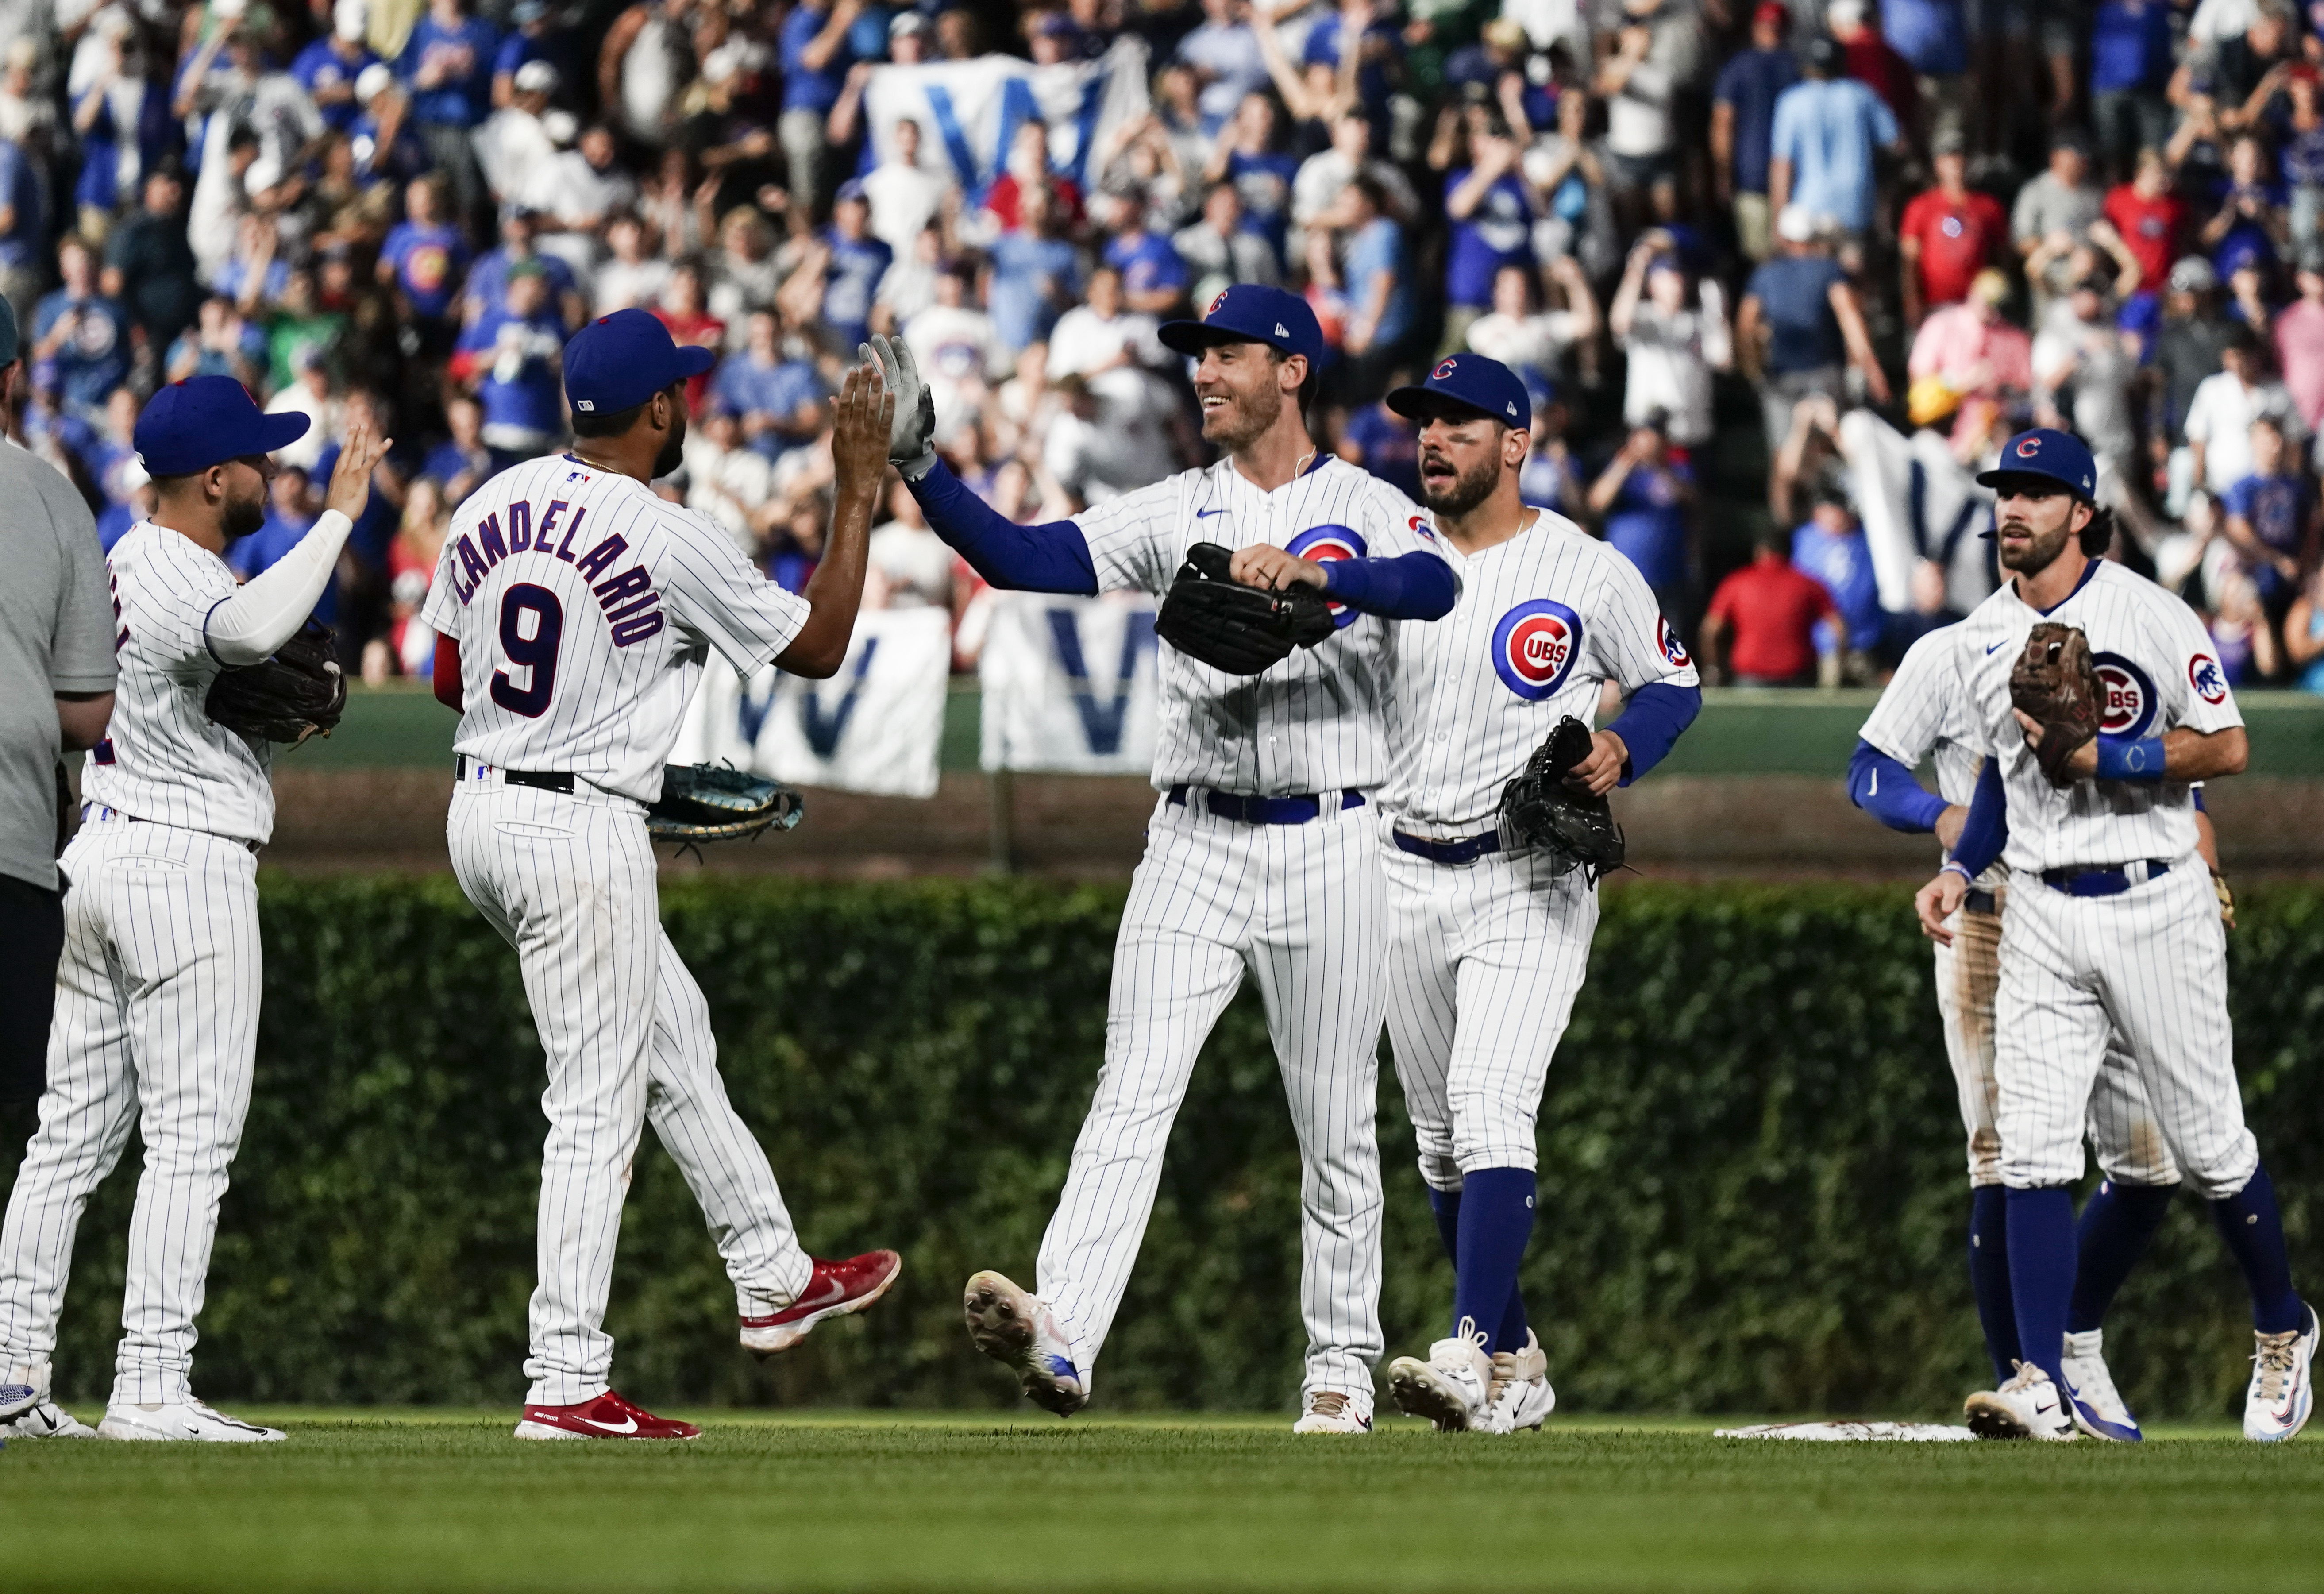 Some former Chicago Cubs players are 2022 NL champions